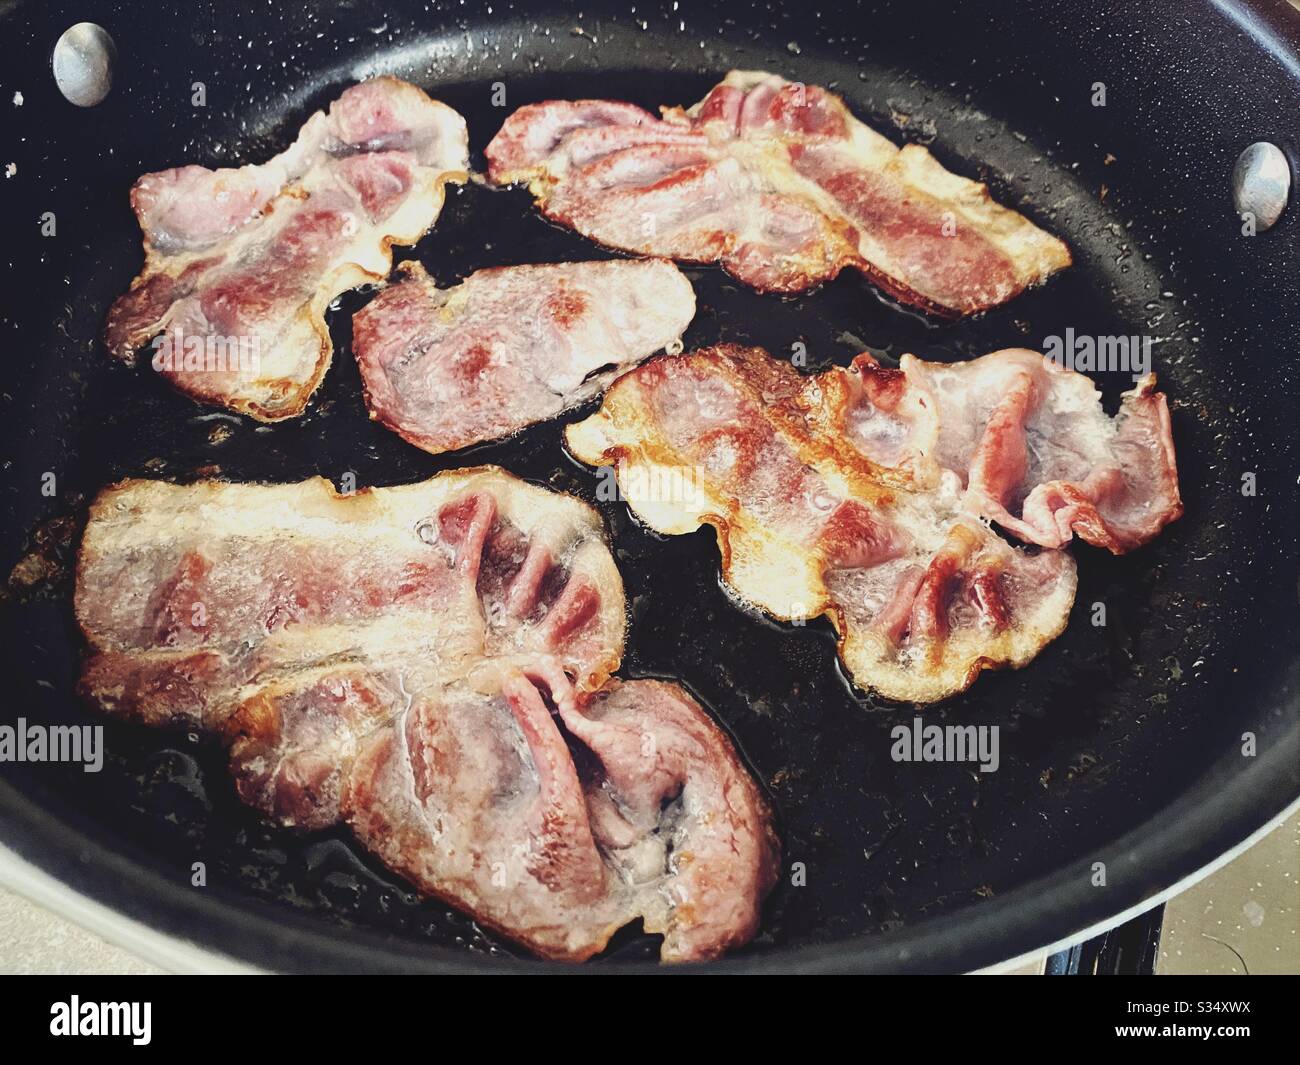 https://c8.alamy.com/comp/S34XWX/a-close-up-view-of-bacon-sizzling-in-the-frying-pan-on-a-stovetop-cooking-bacon-slices-for-breakfast-fry-up-S34XWX.jpg